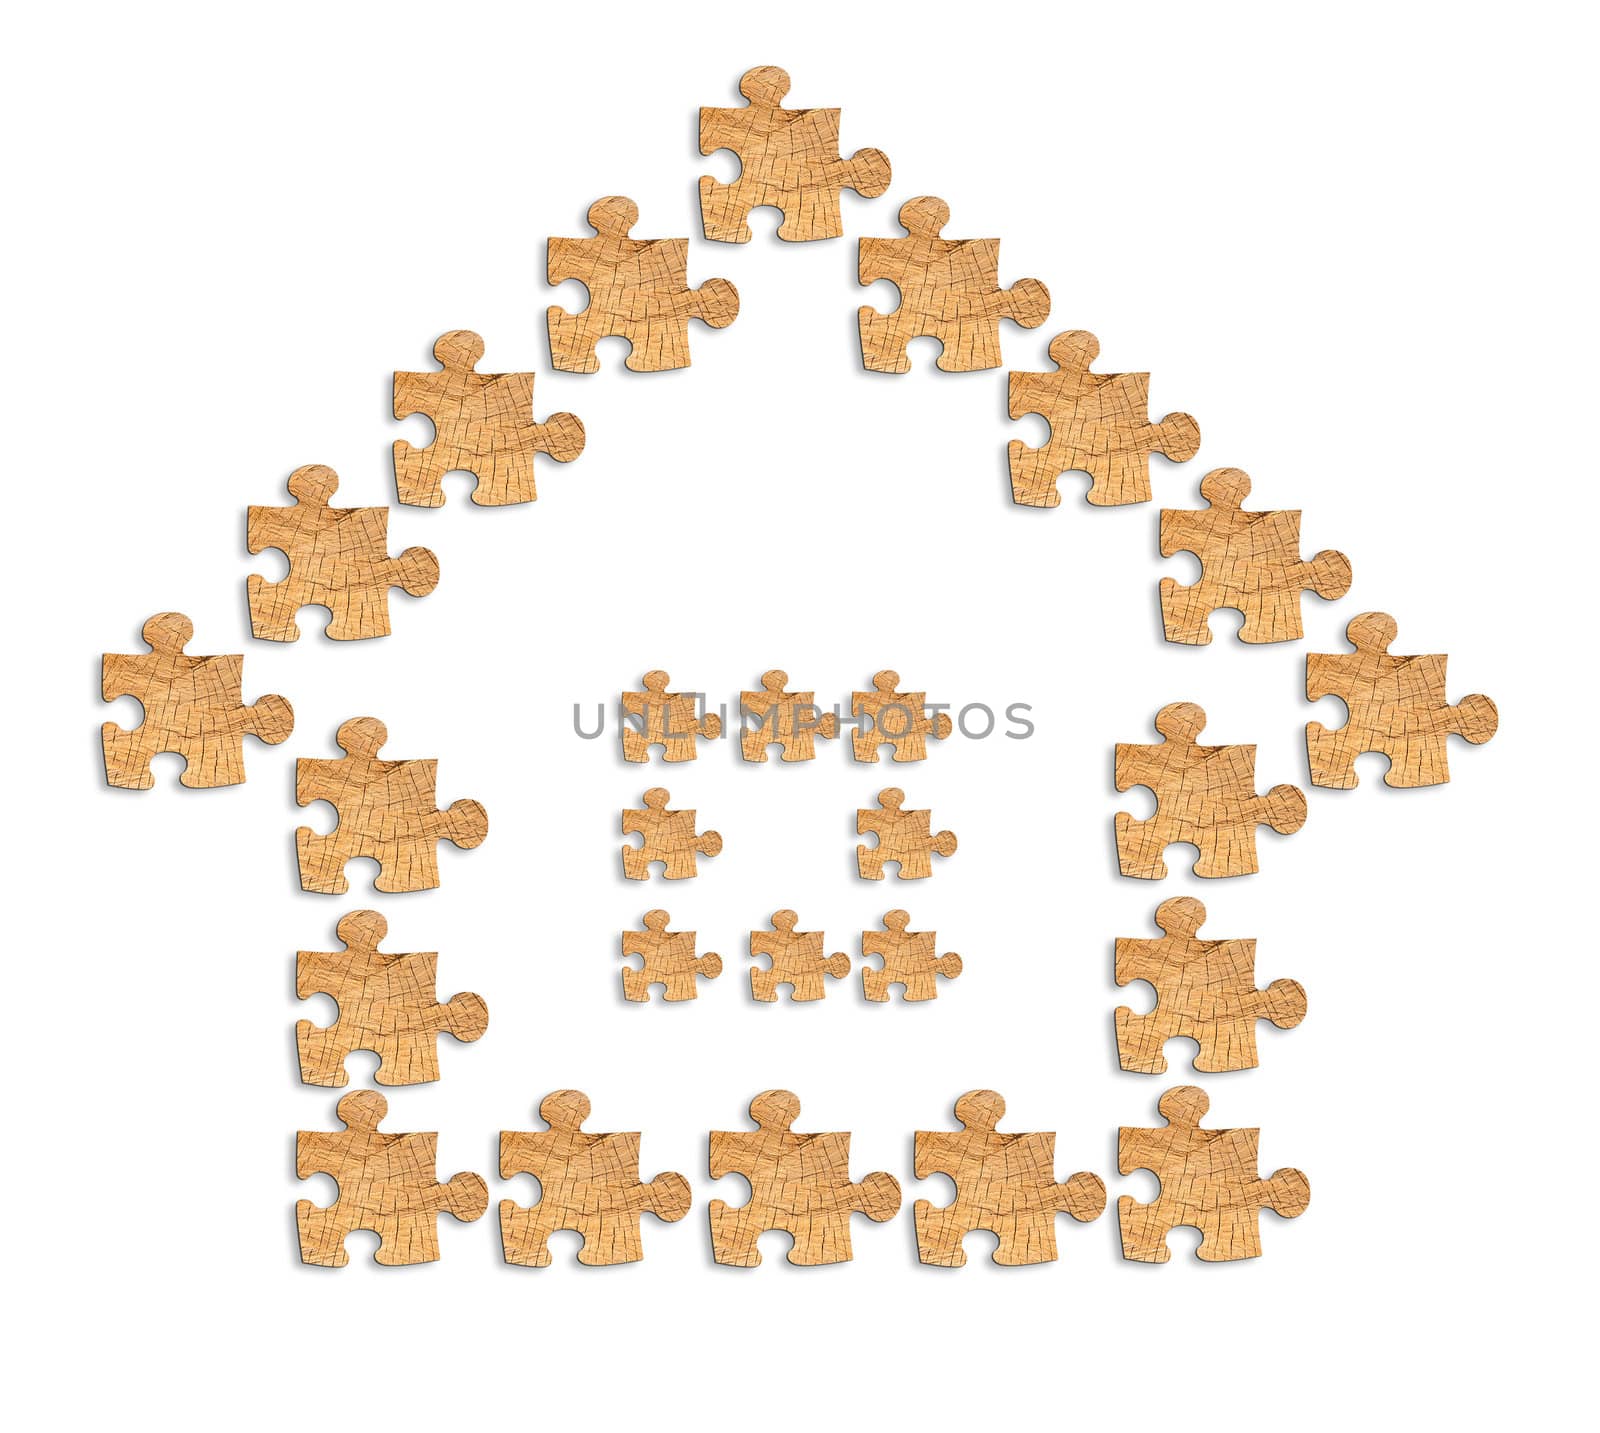 image of a house made of wooden figures puzzles by Zhukow